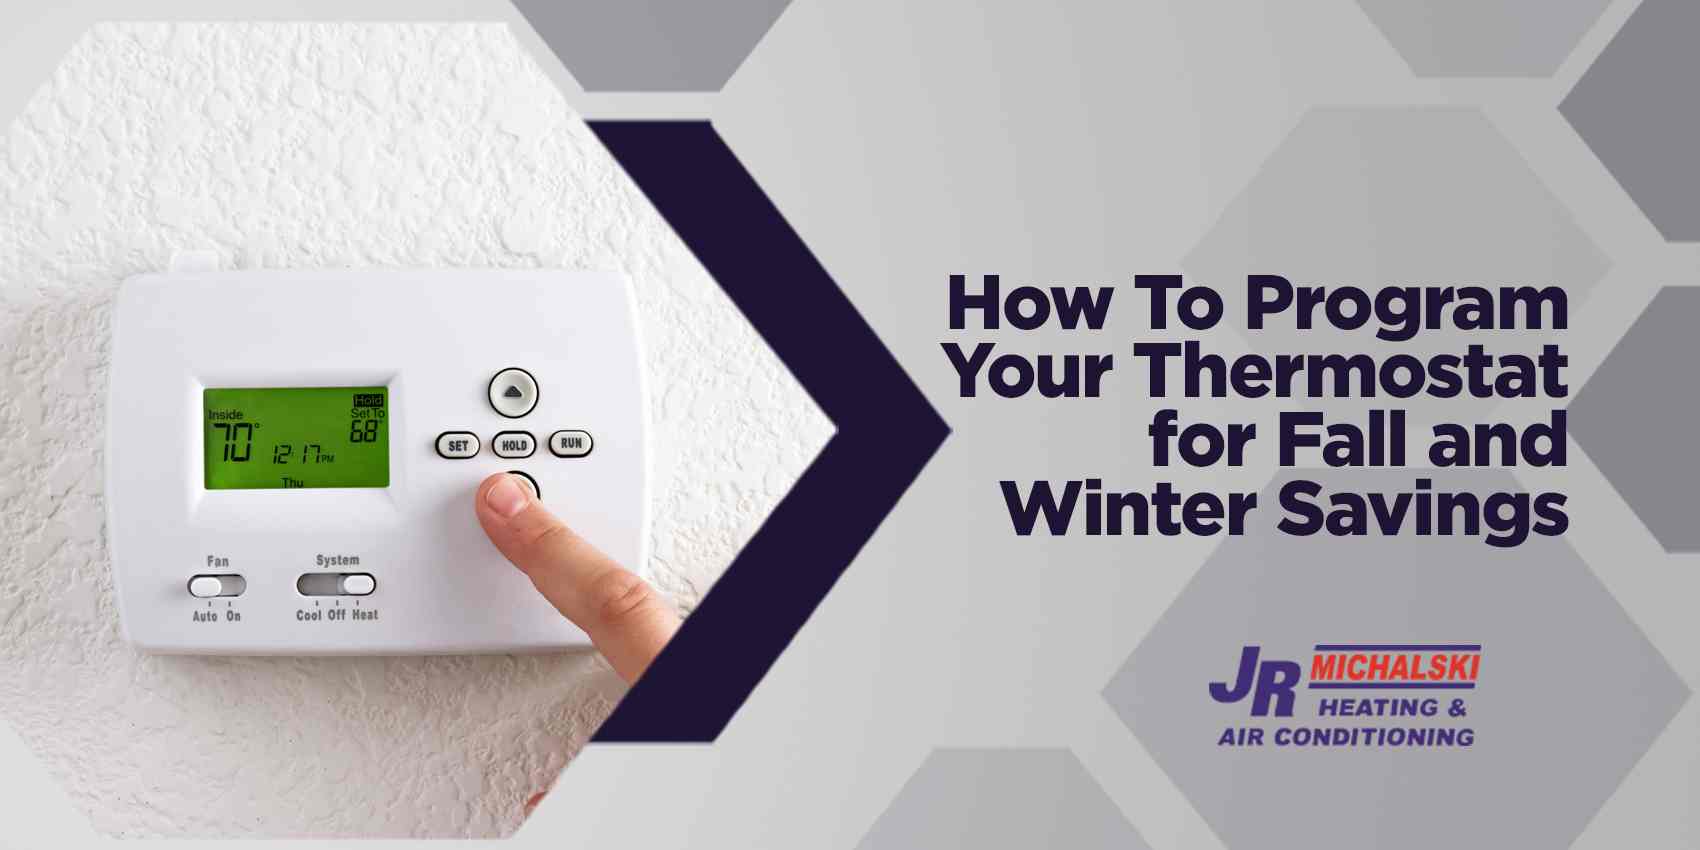 How To Program Your Thermostat for Fall and Winter Savings